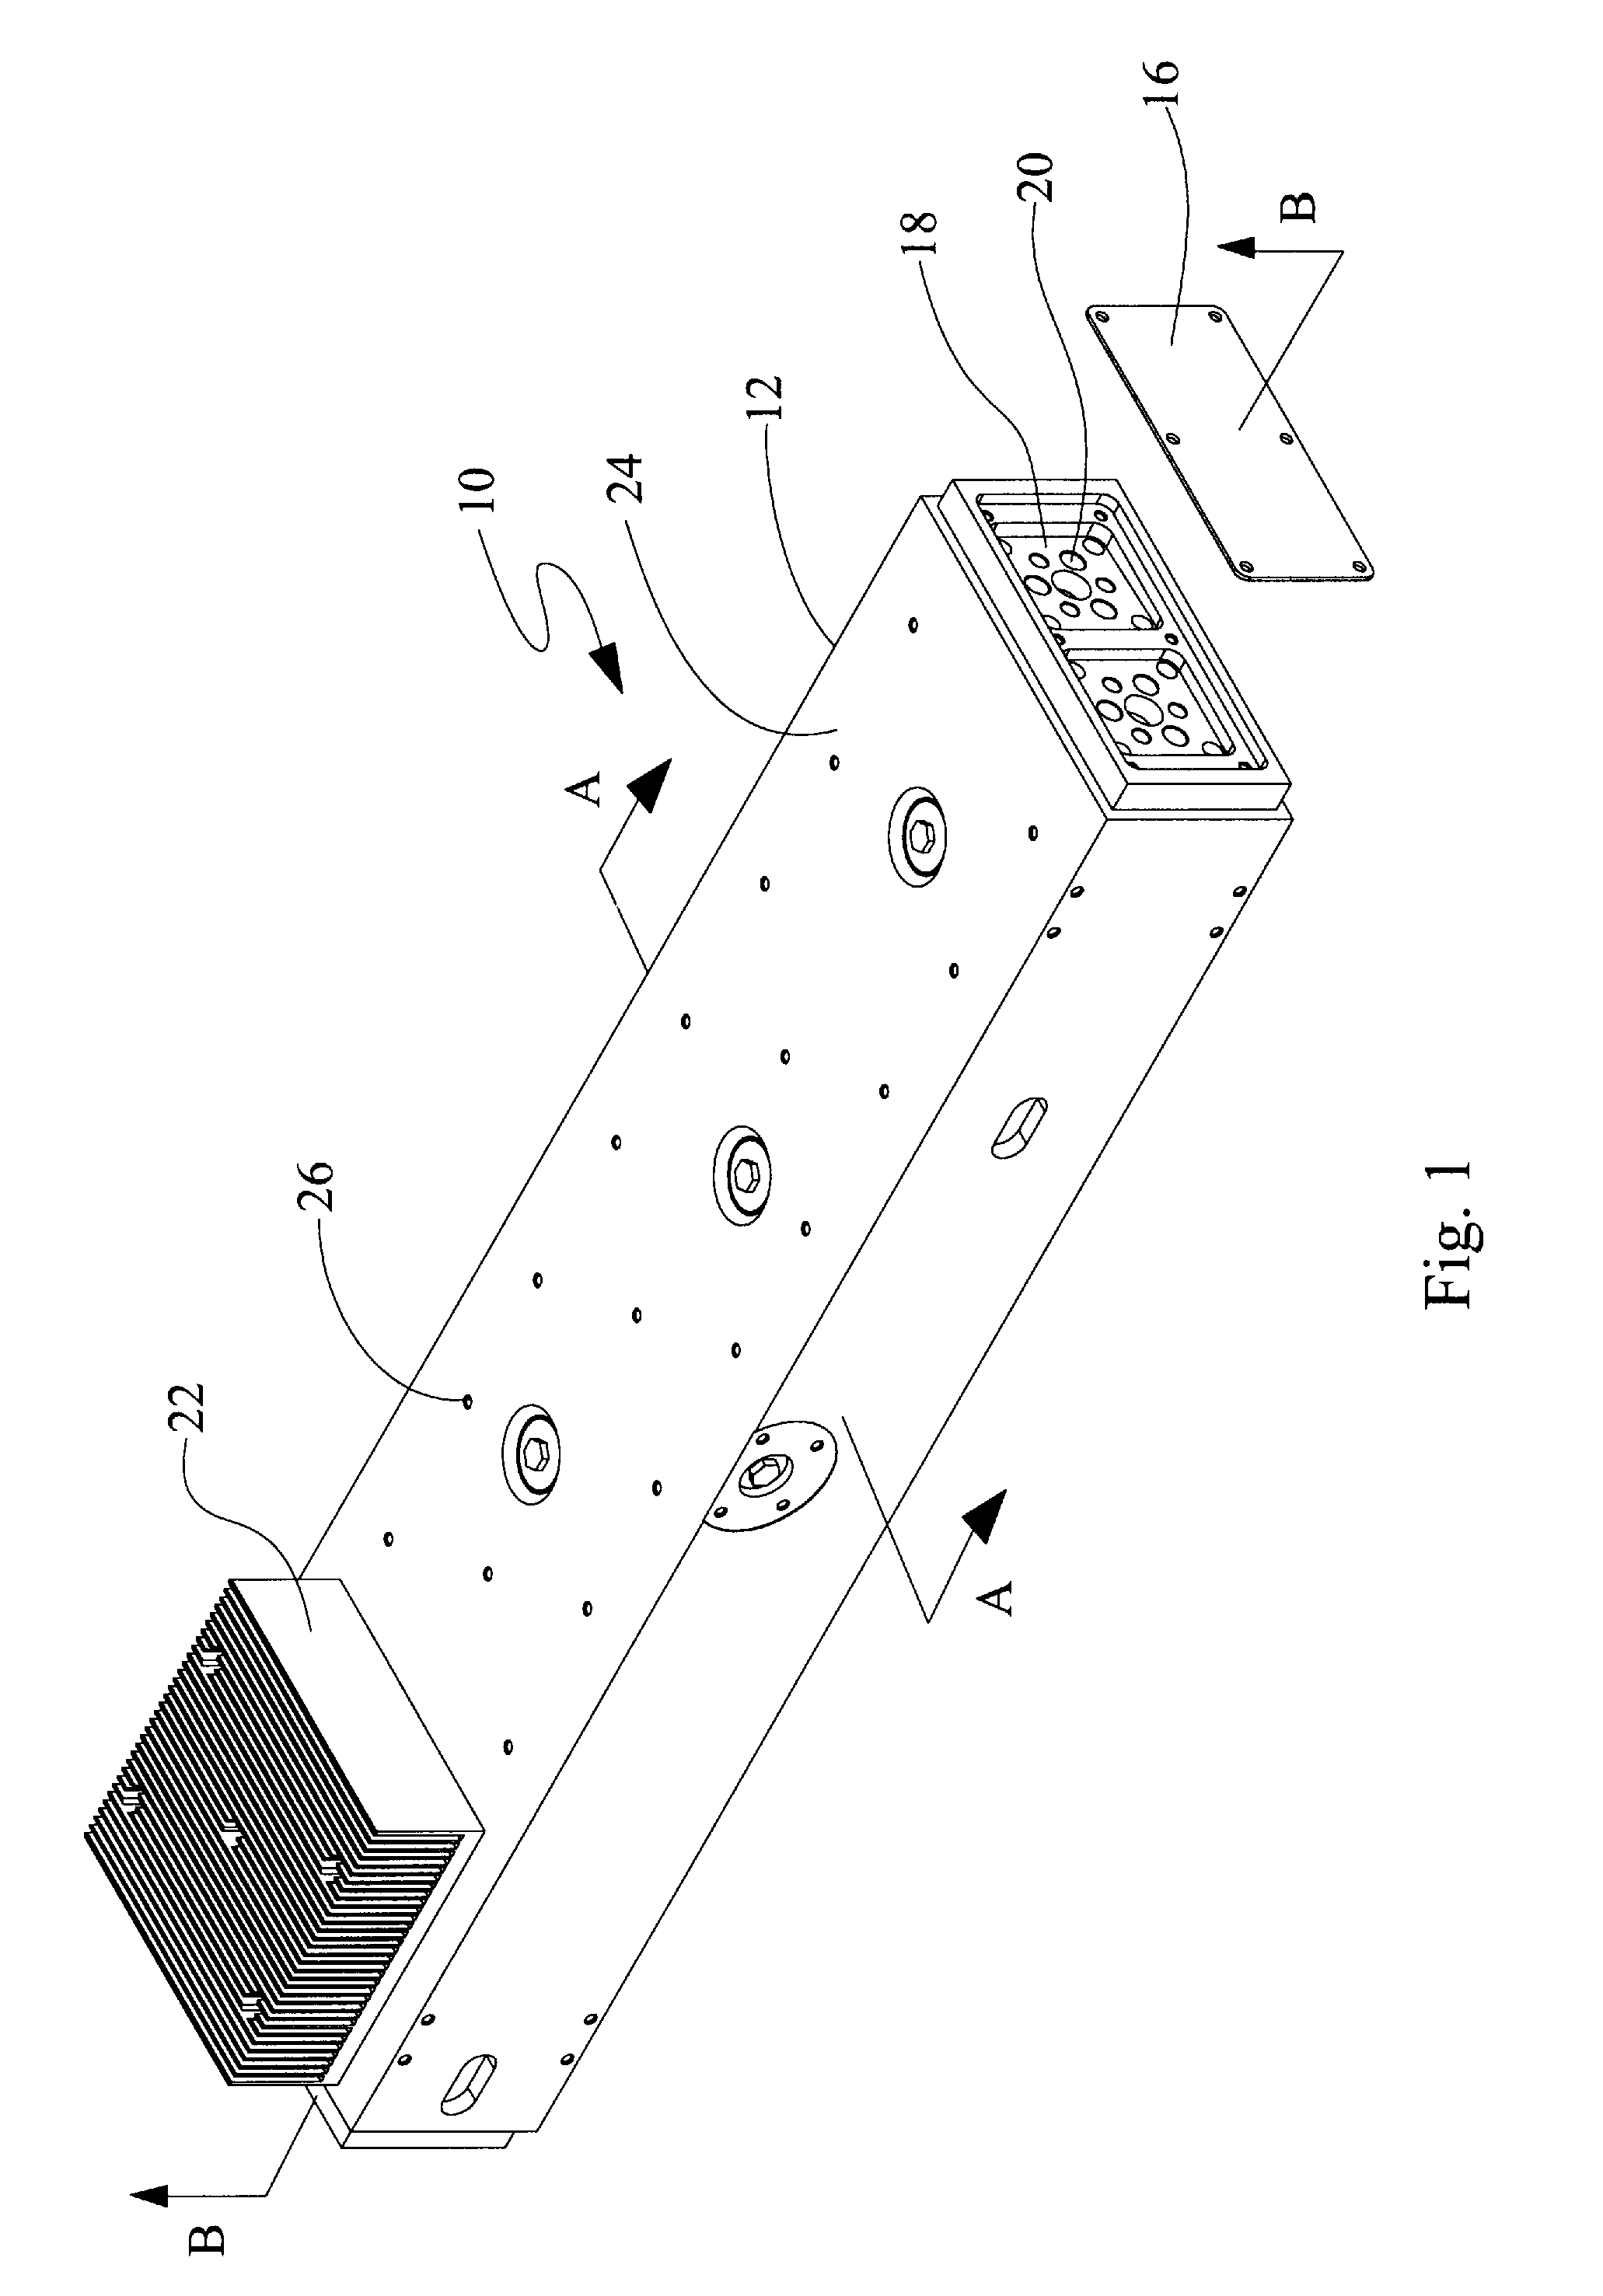 Non-linear waveguided laser channel for a gas laser